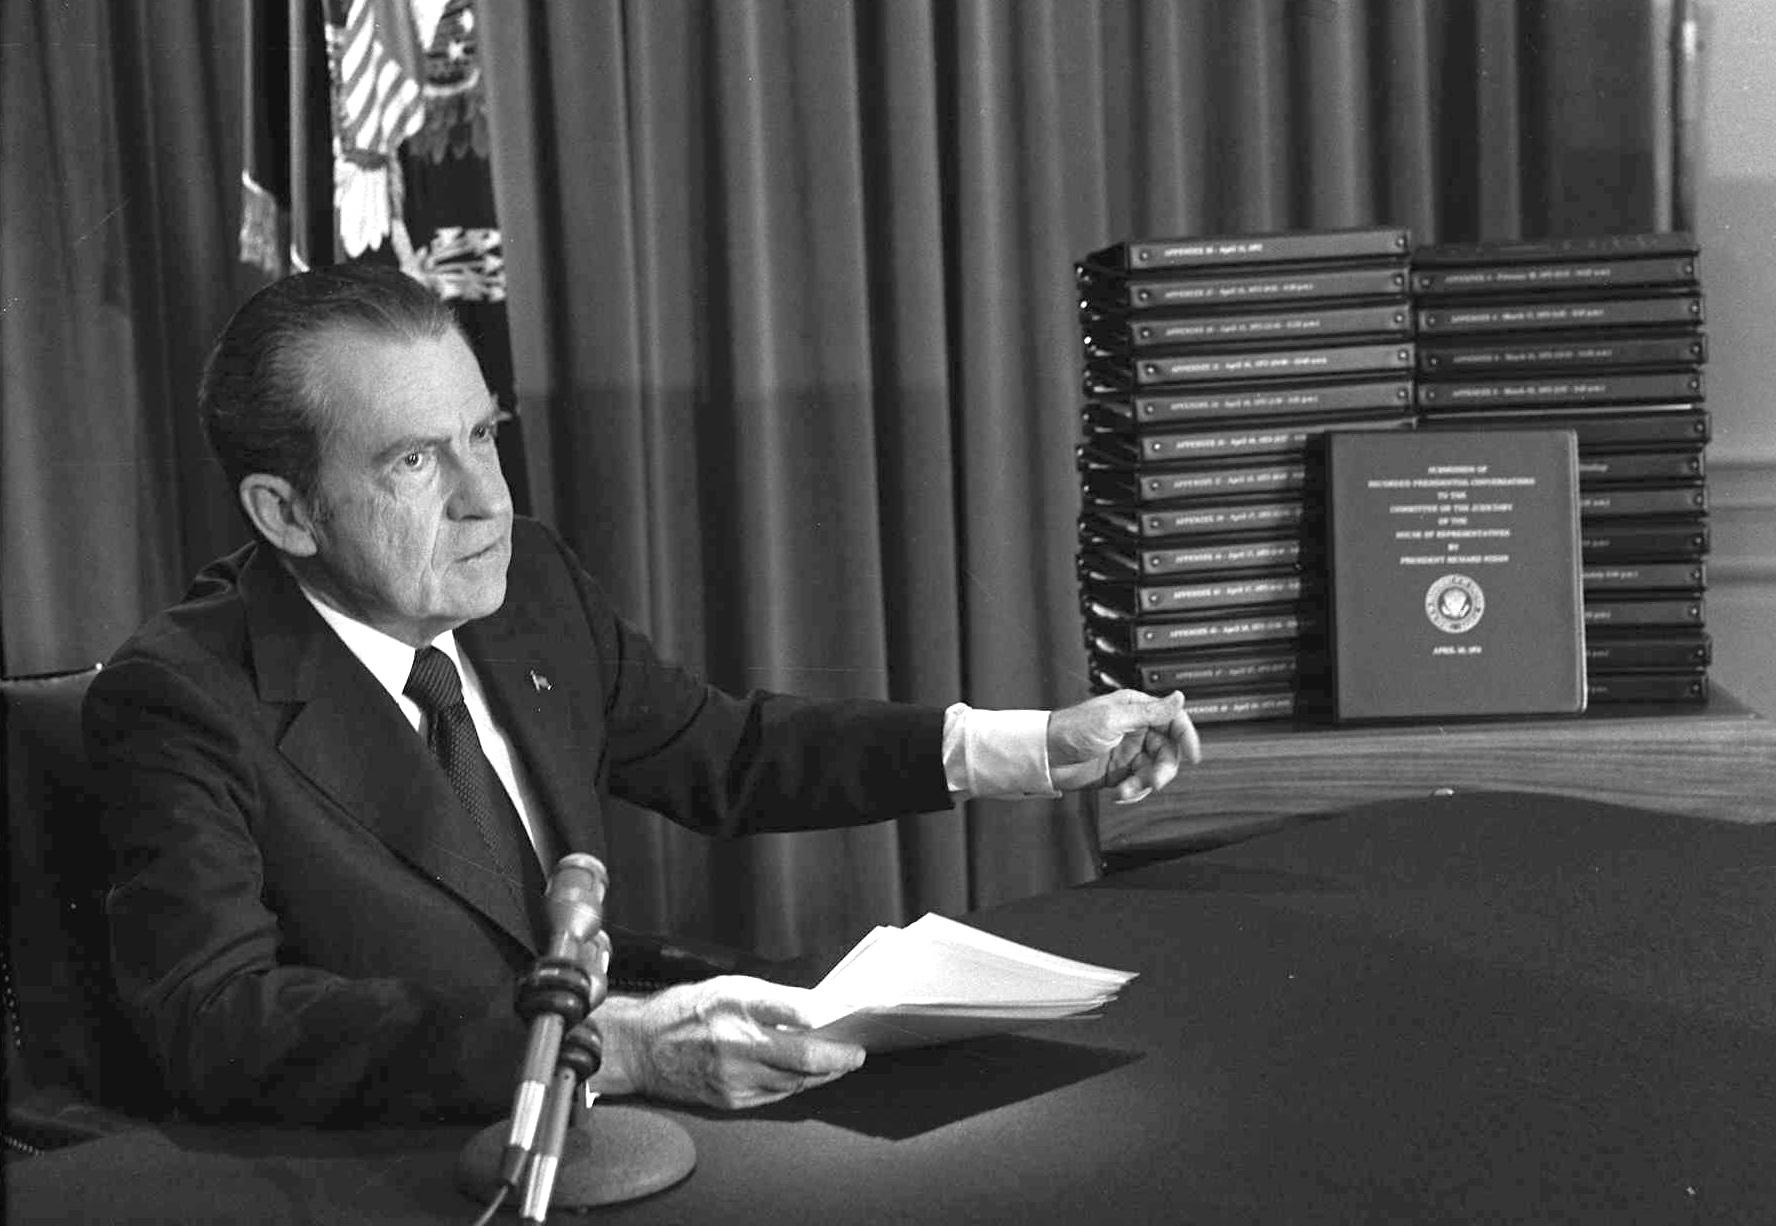 In this April 29, 1974 file photo, President Richard M. Nixon points to the transcripts of the White House tapes in Washington, after he announced on television that he would turn over the transcripts to House impeachment investigators. (AP Photo / File)